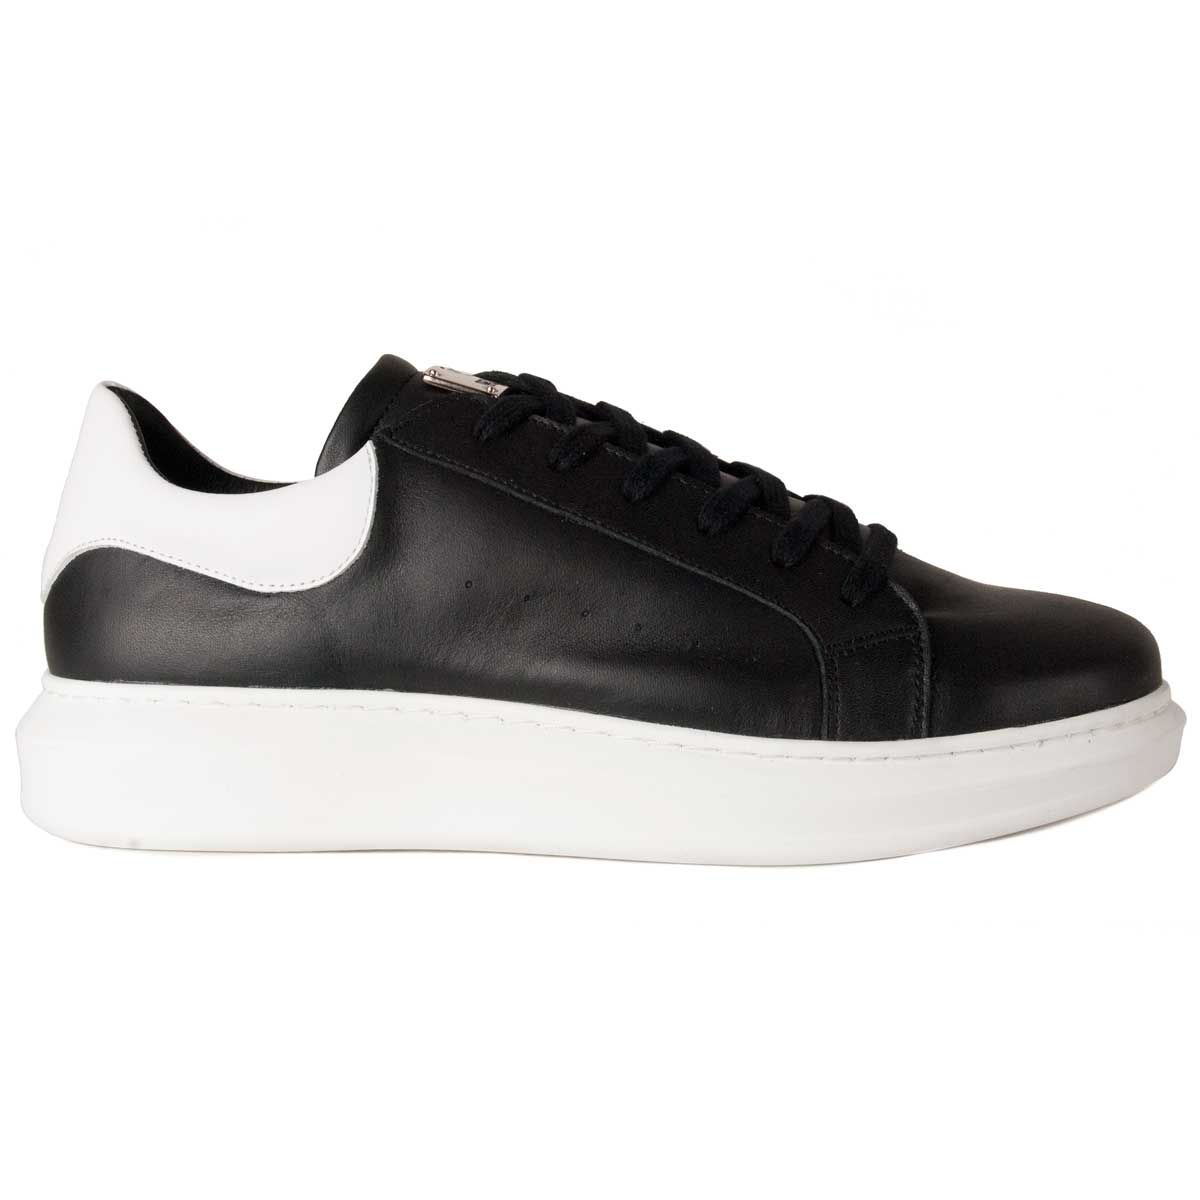 Sneaker low, black skin with white heel. Thermoformed template. White rubber sole.